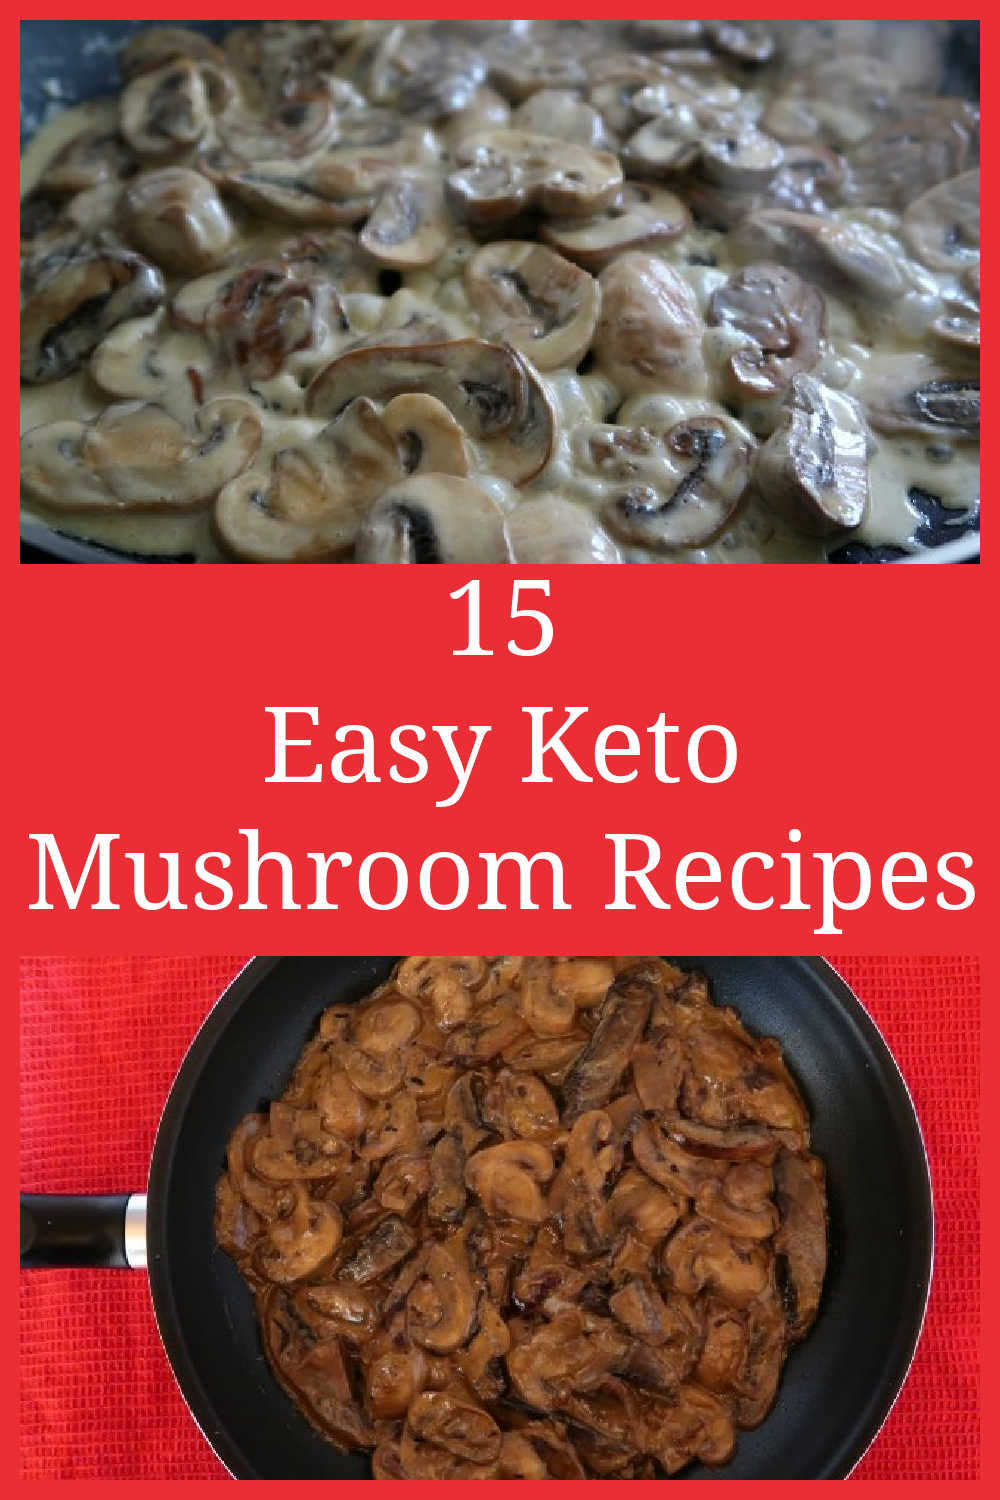 Keto Mushroom Recipes - 15 easy low carb recipe ideas with mushrooms - including creamy garlic dishes - with the video tutorials.